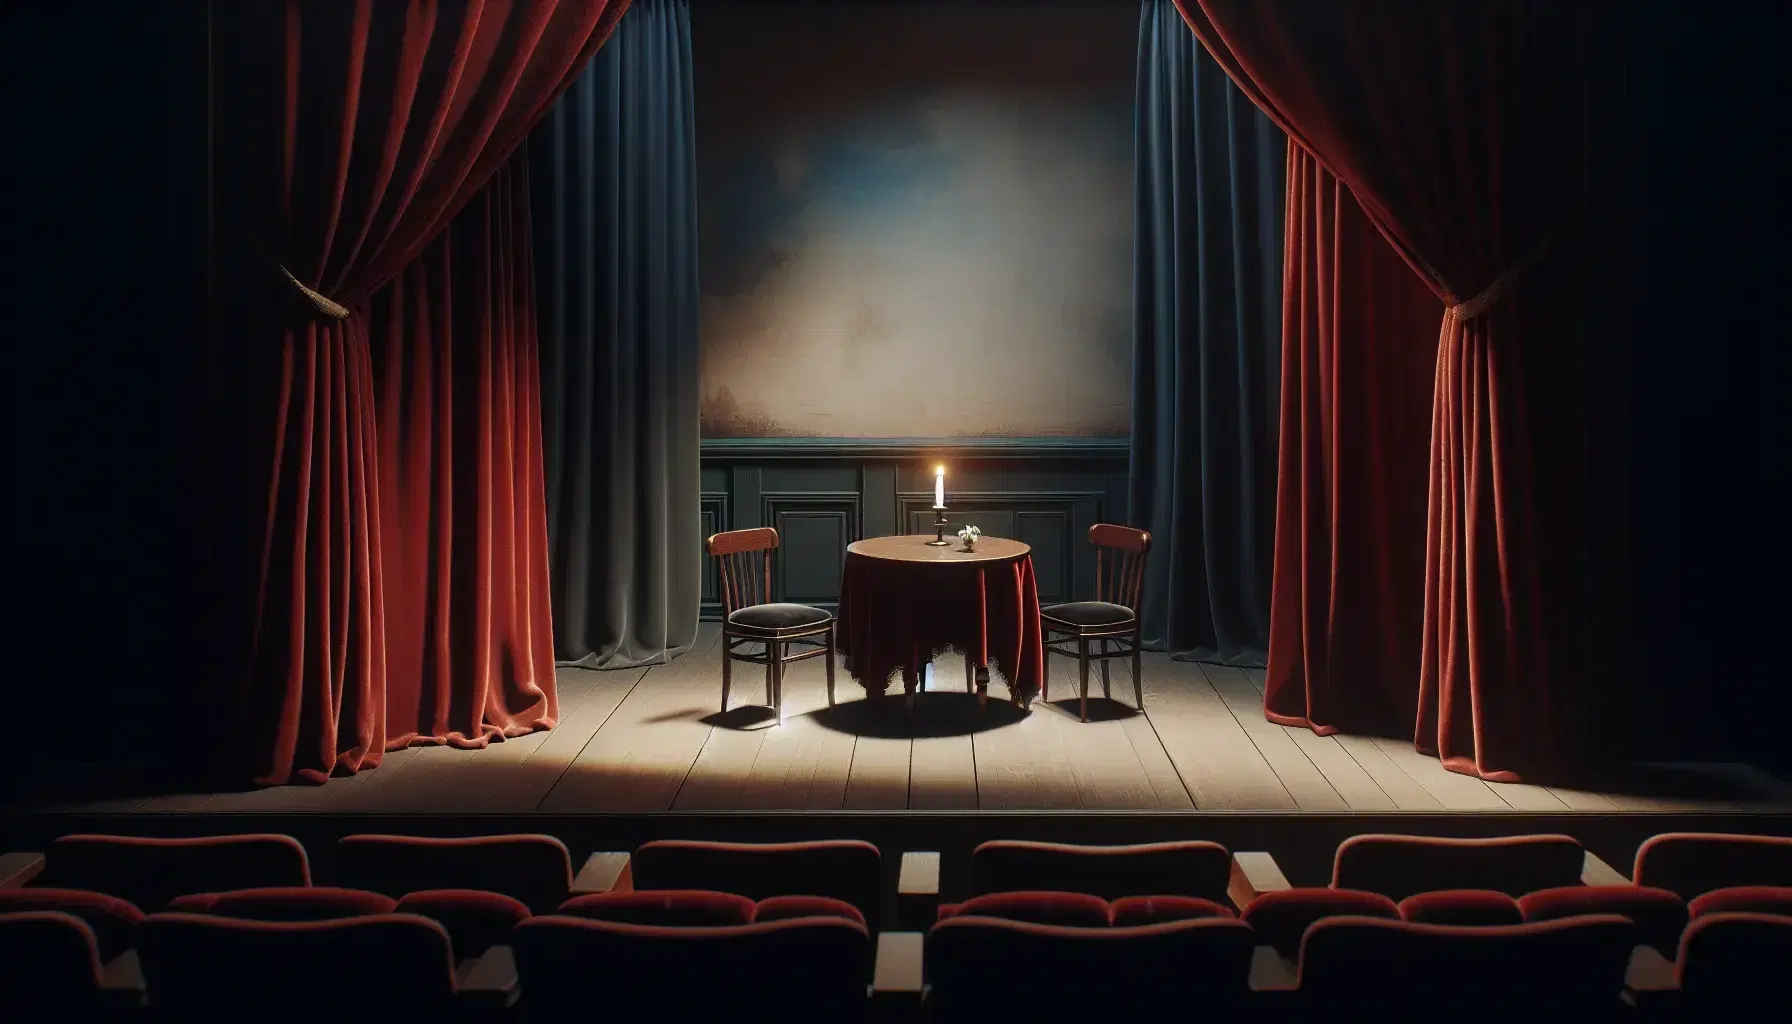 Intimate theater stage with red velvet curtains, a mahogany table, two chairs, and a white candle, set against a muted blue-gray backdrop, under warm lighting.